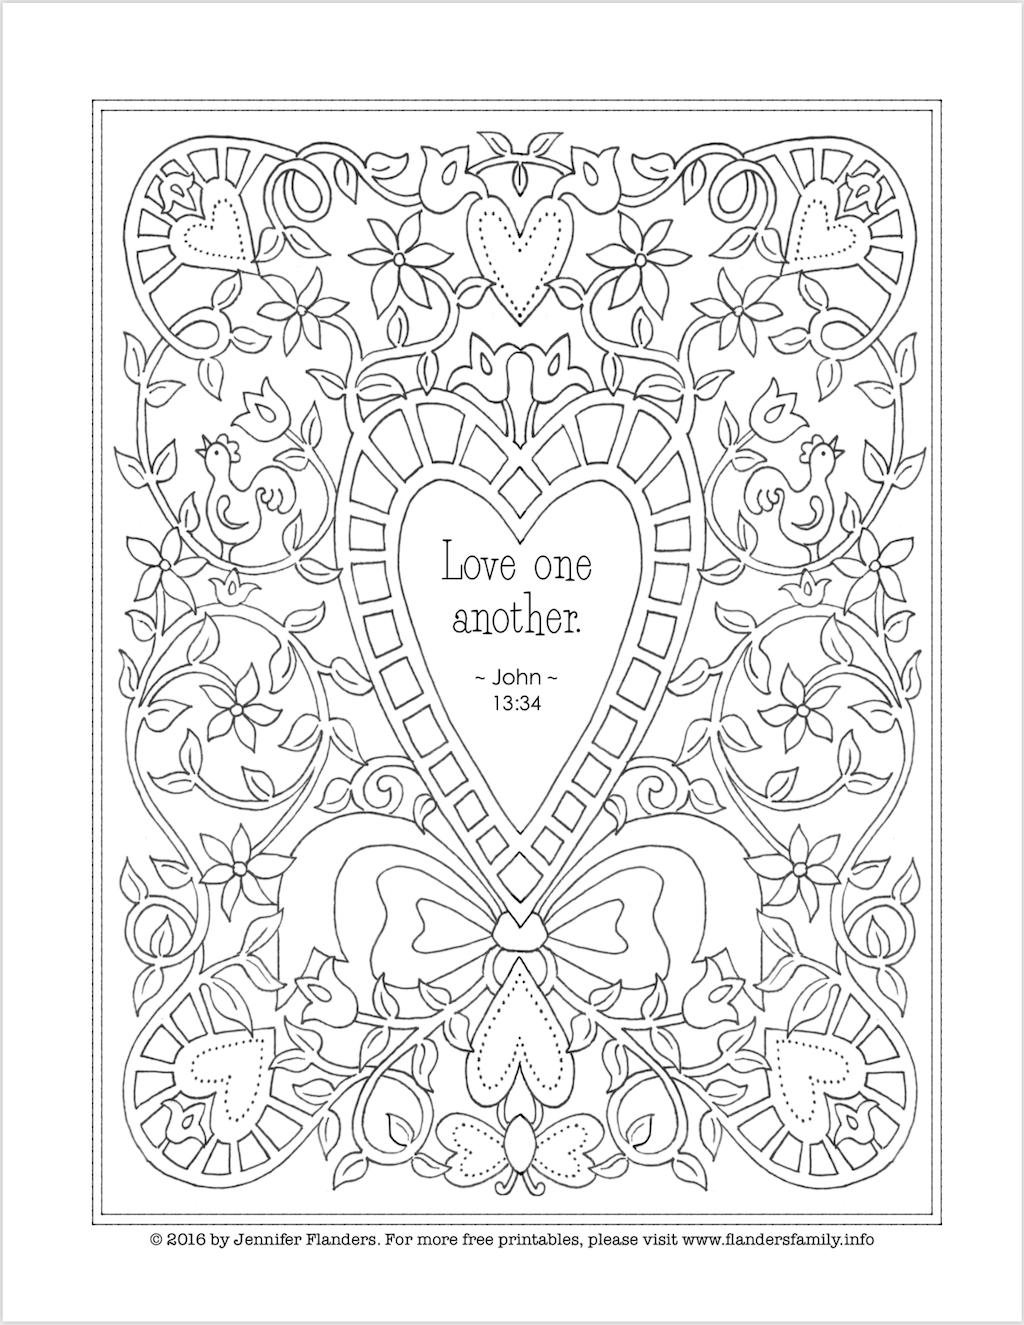 Coloring Pages for Valentine's Day   Flanders Family Homelife